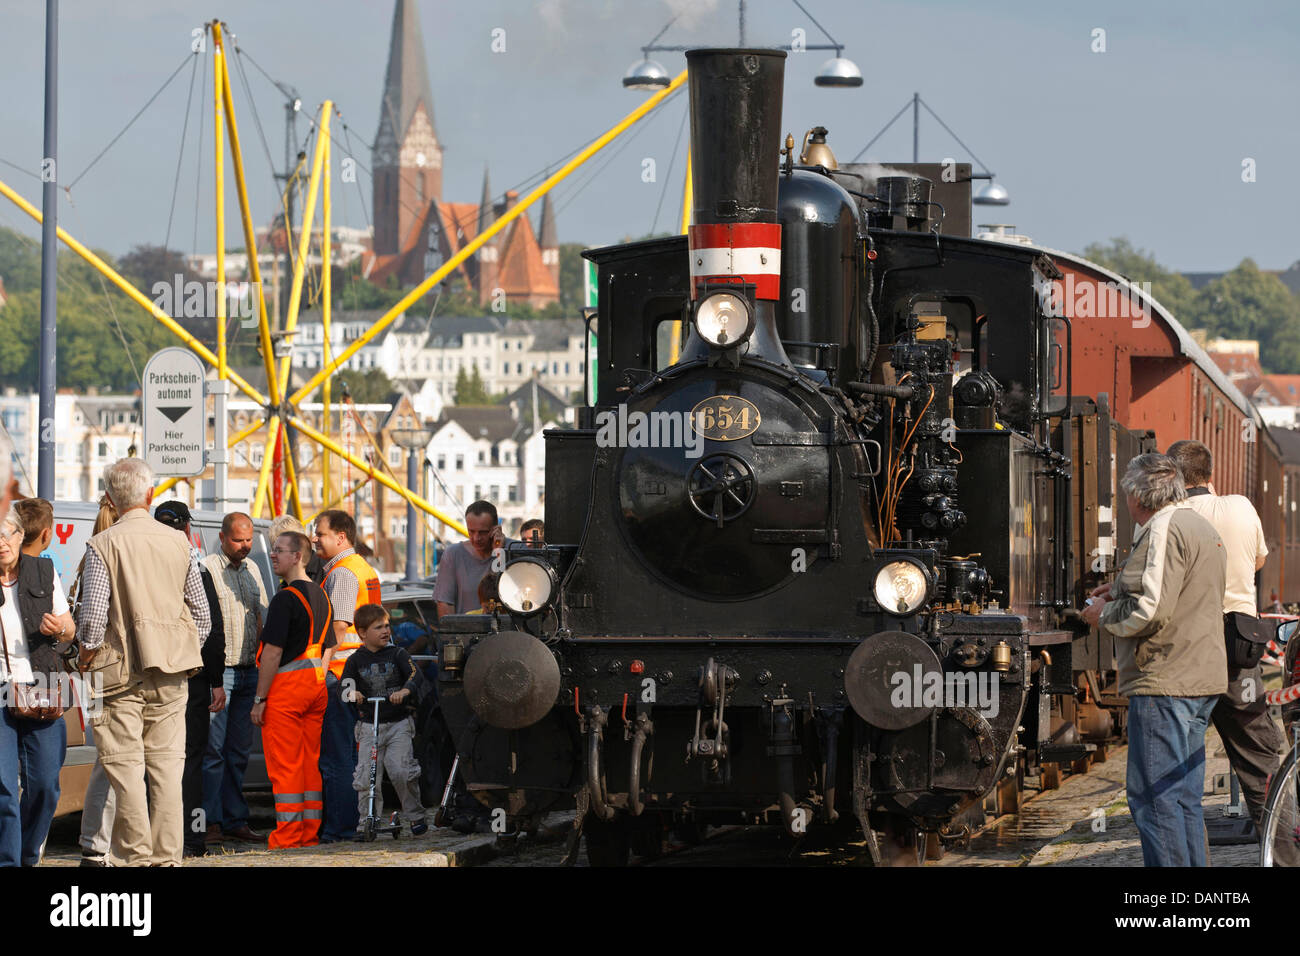 A Danish type F steam locomotive sits the pier in Flensburg, Germany, 08 July 2011. Along with many other steamships and other steam driven engines, the event 'Dampf Rundum' is the largest steamer spectacle in Europe, according to the event organizers. Photo: Markus Scholz Stock Photo